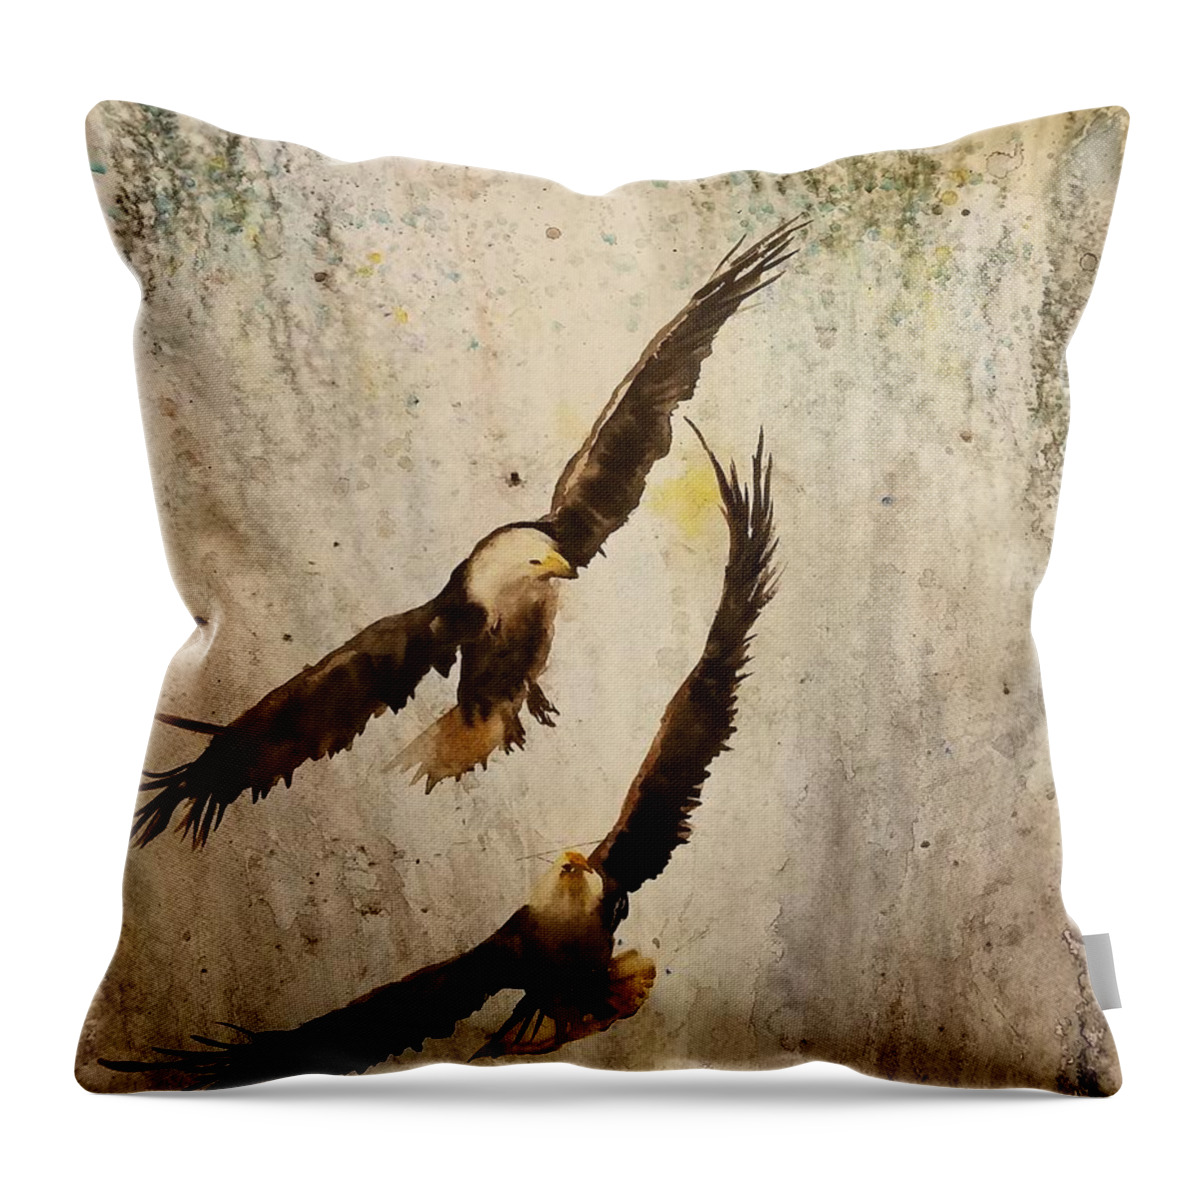 The Eagles And Waterfall Throw Pillow featuring the painting The eagles and waterfall by Han in Huang wong